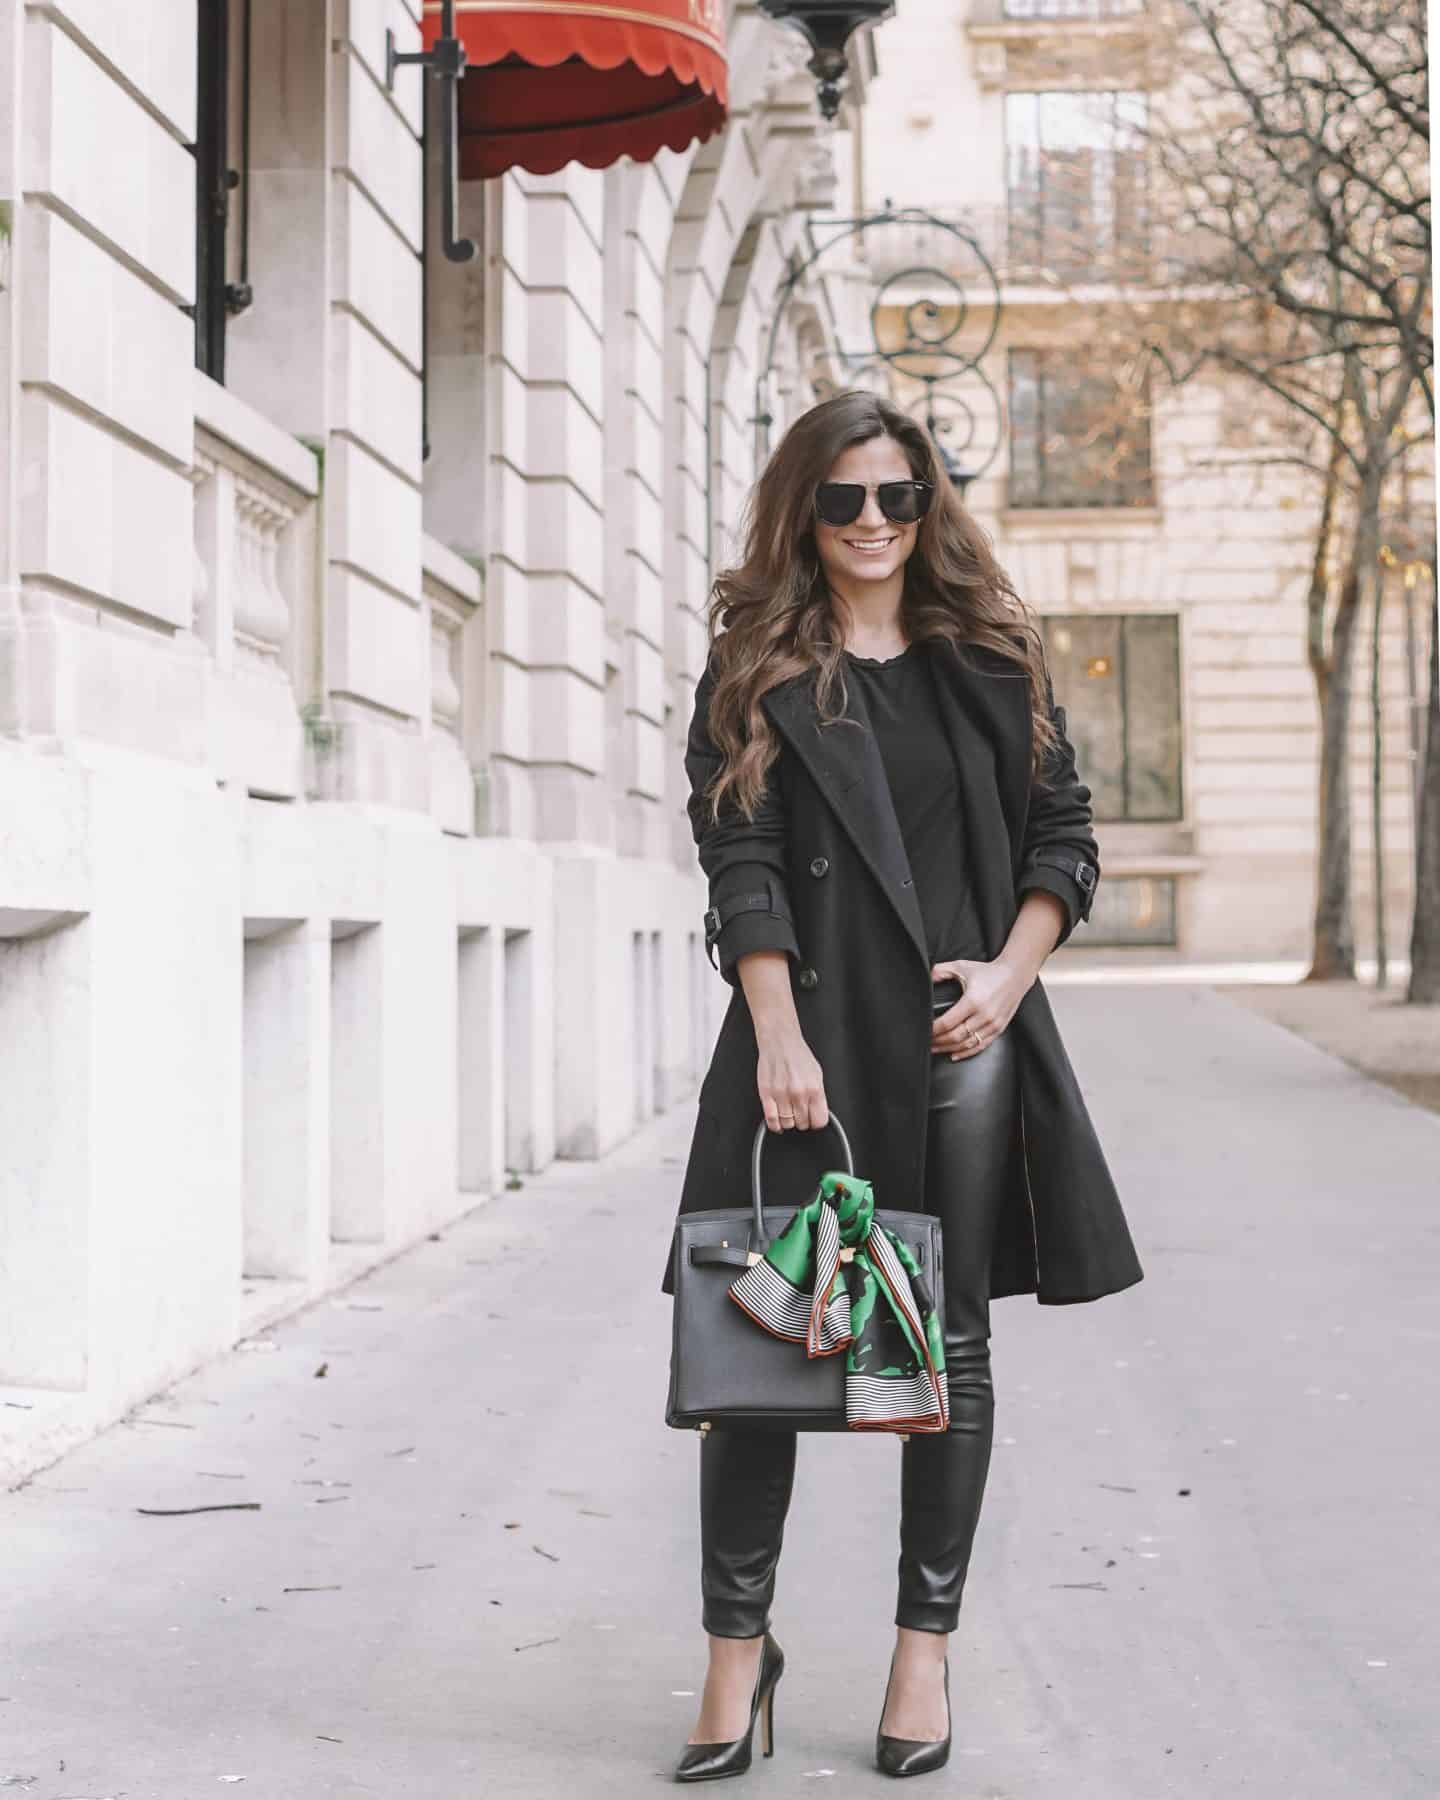 How Parisians Style an all black outfit